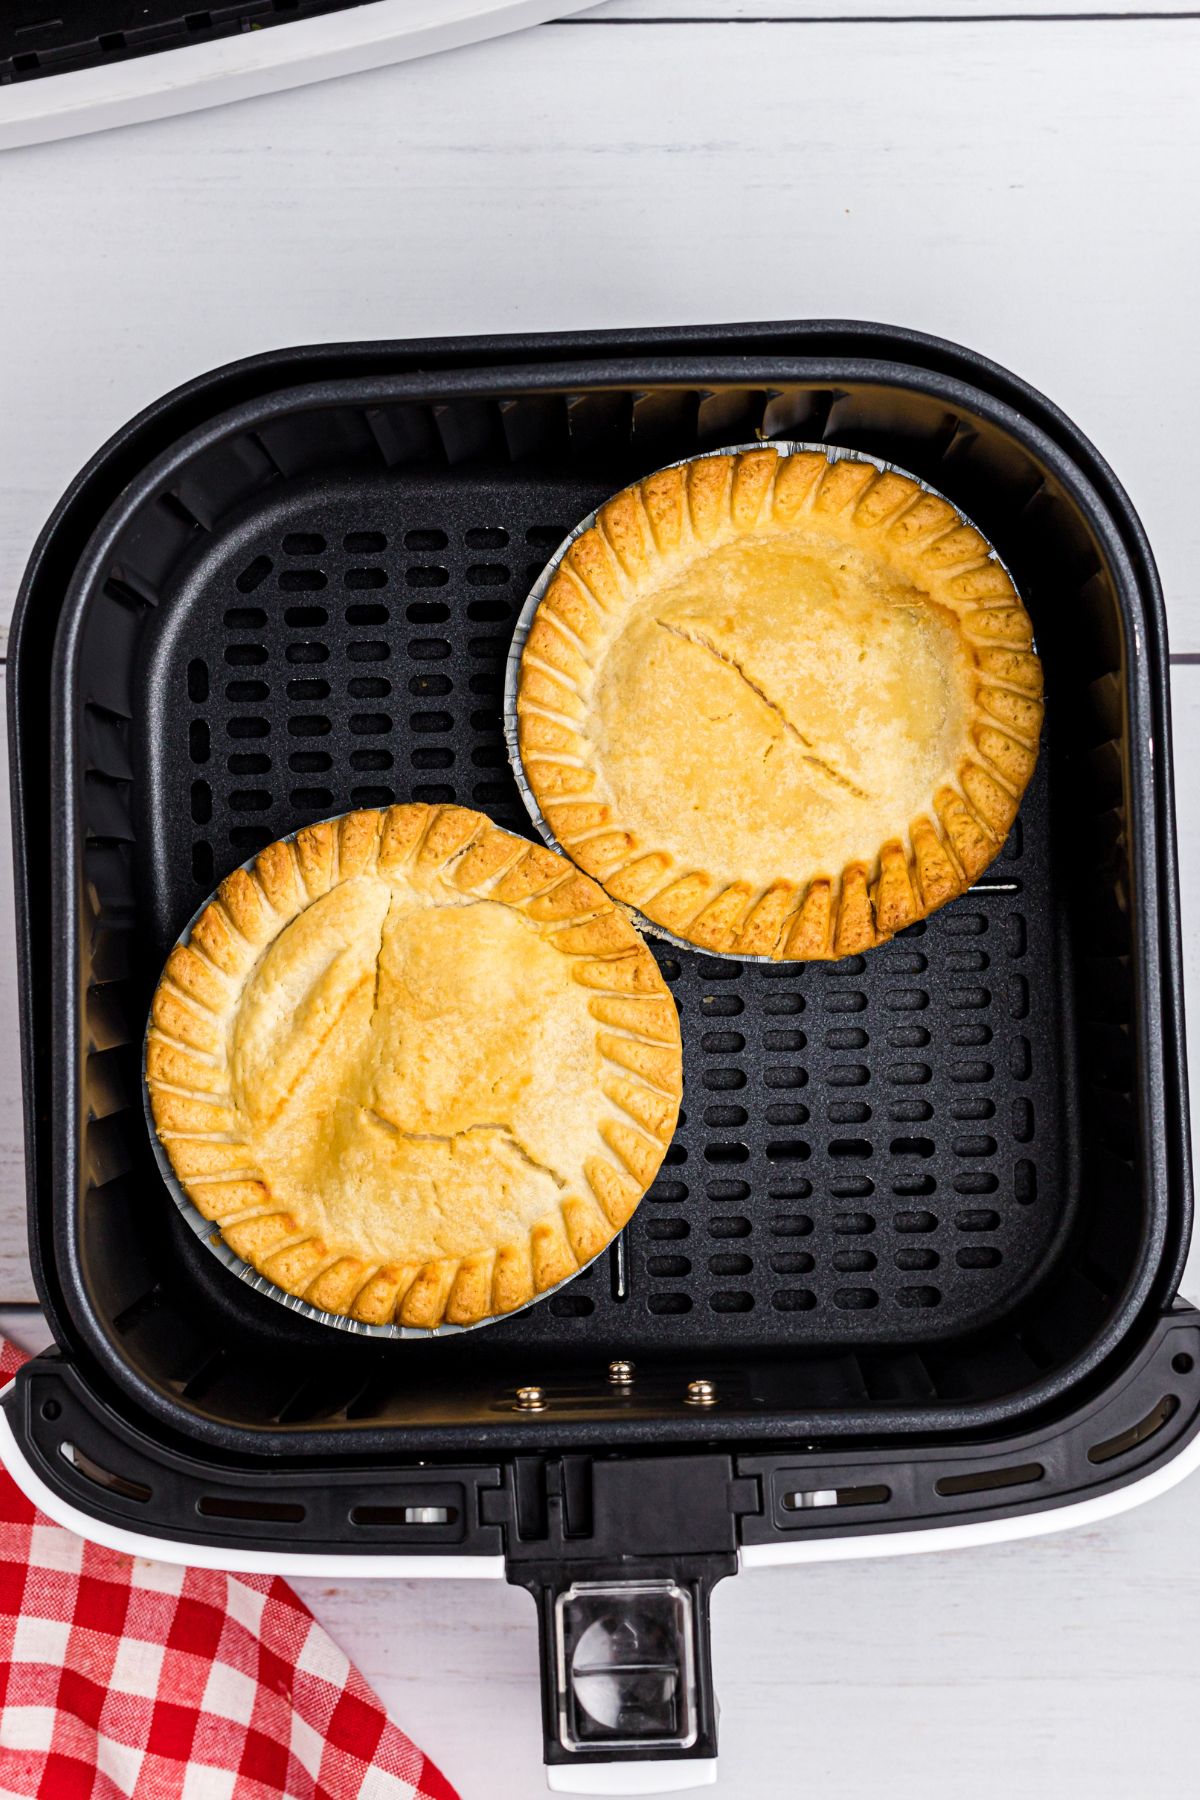 Golden pot pies in the air fryer basket after being cooked